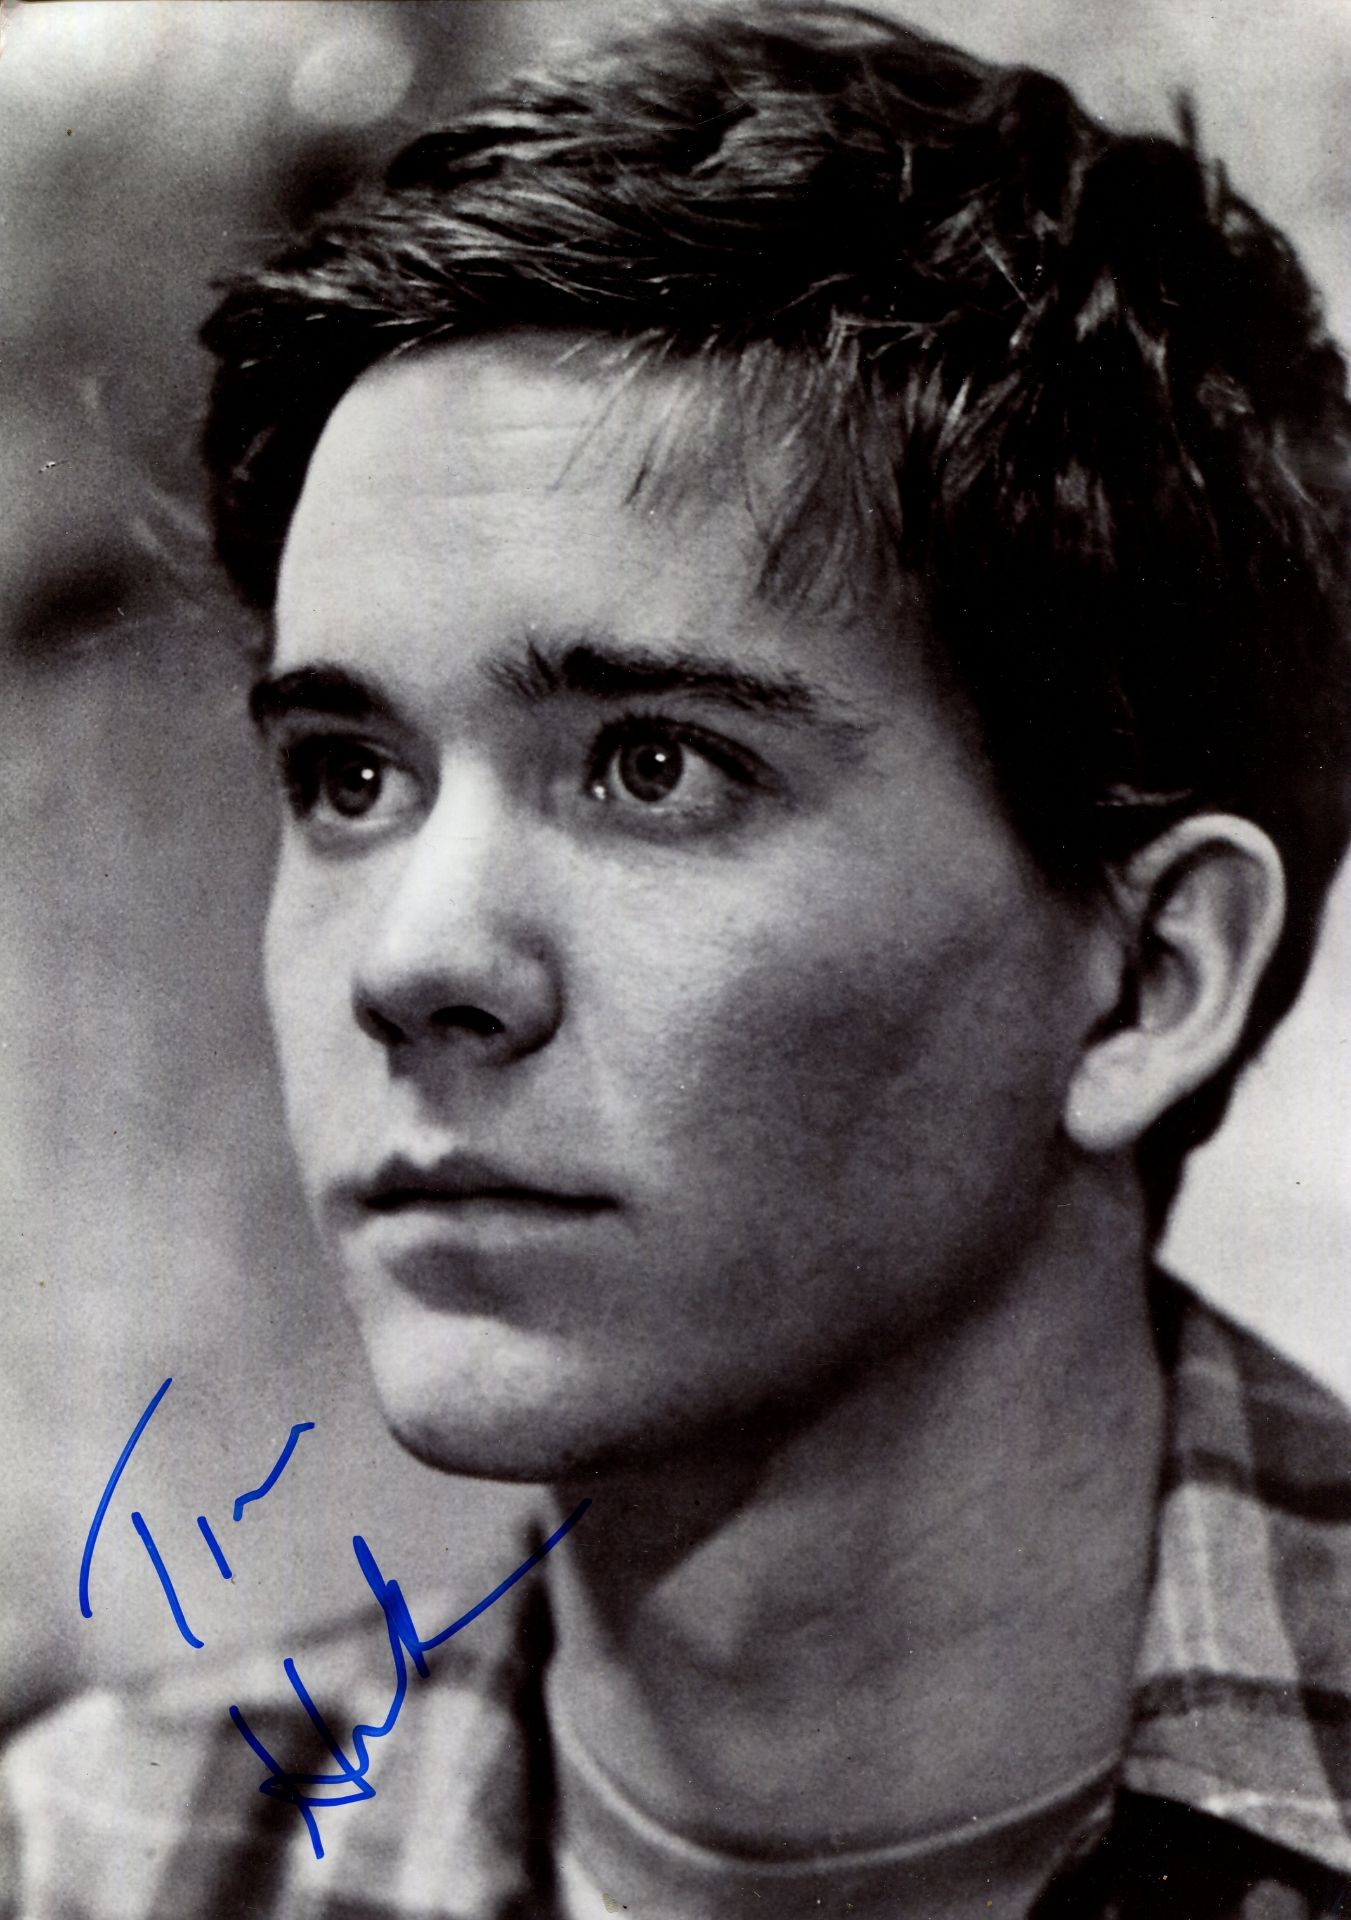 HUTTON TIMOTHY: (1960- ) American actor, Academy Award winner. Signed 8 x 12 photograph of Hutton in